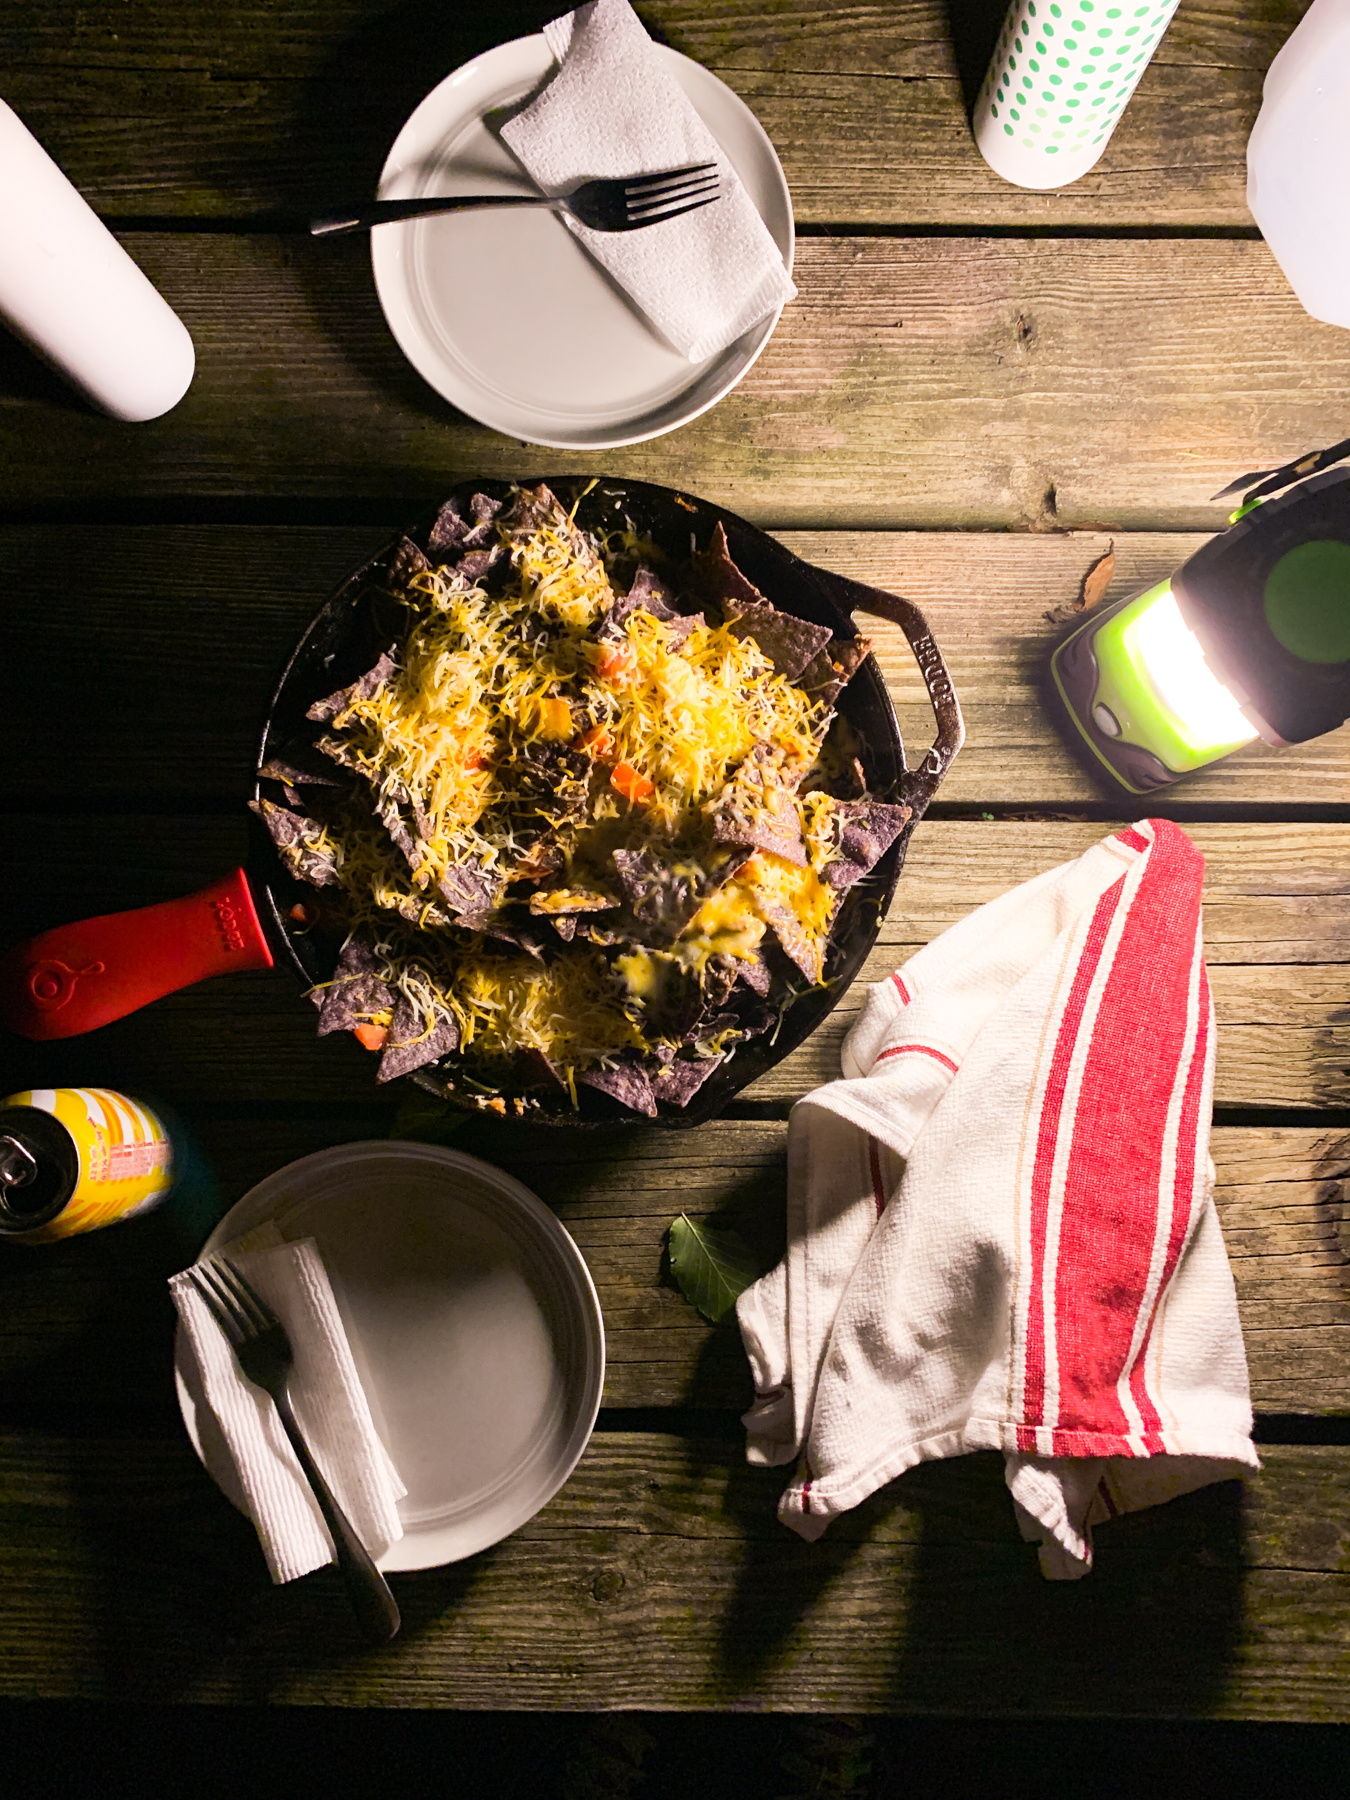 nachos in a cast iron skillet at night while camping on a picnic table